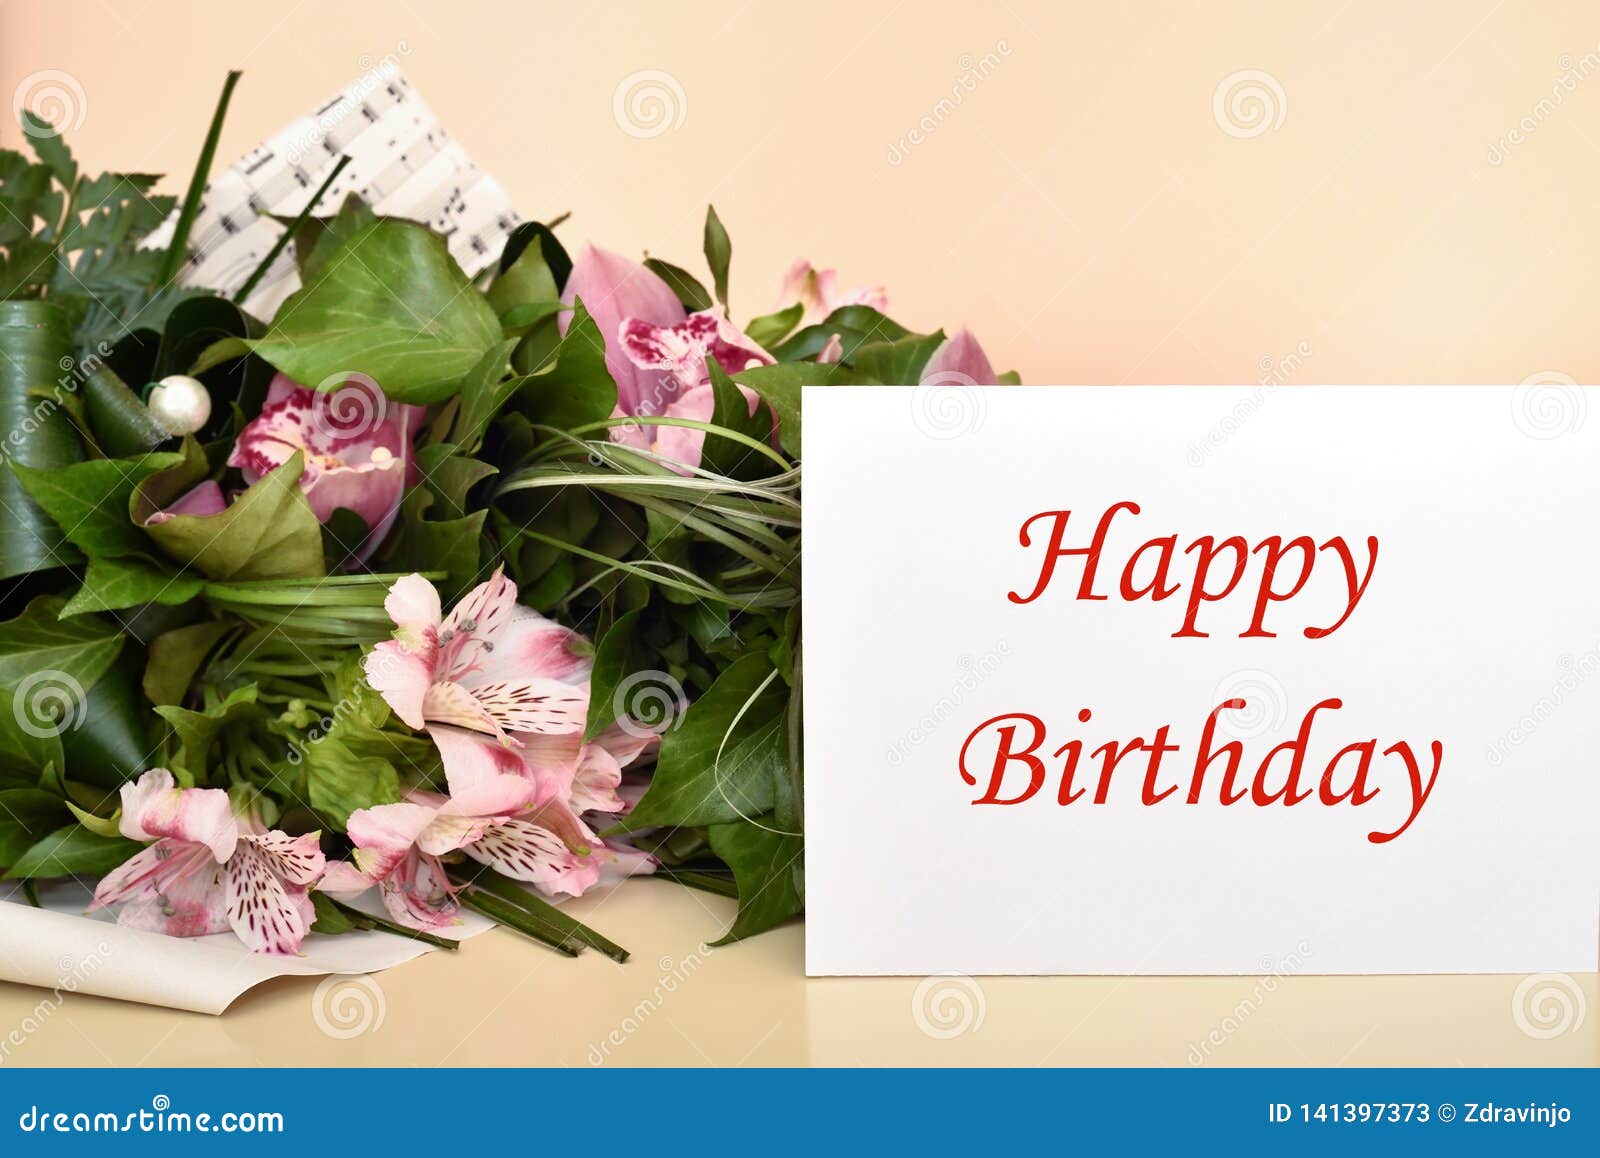 Say Happy Birthday With Flowers To Make Their Birthdays Really Special